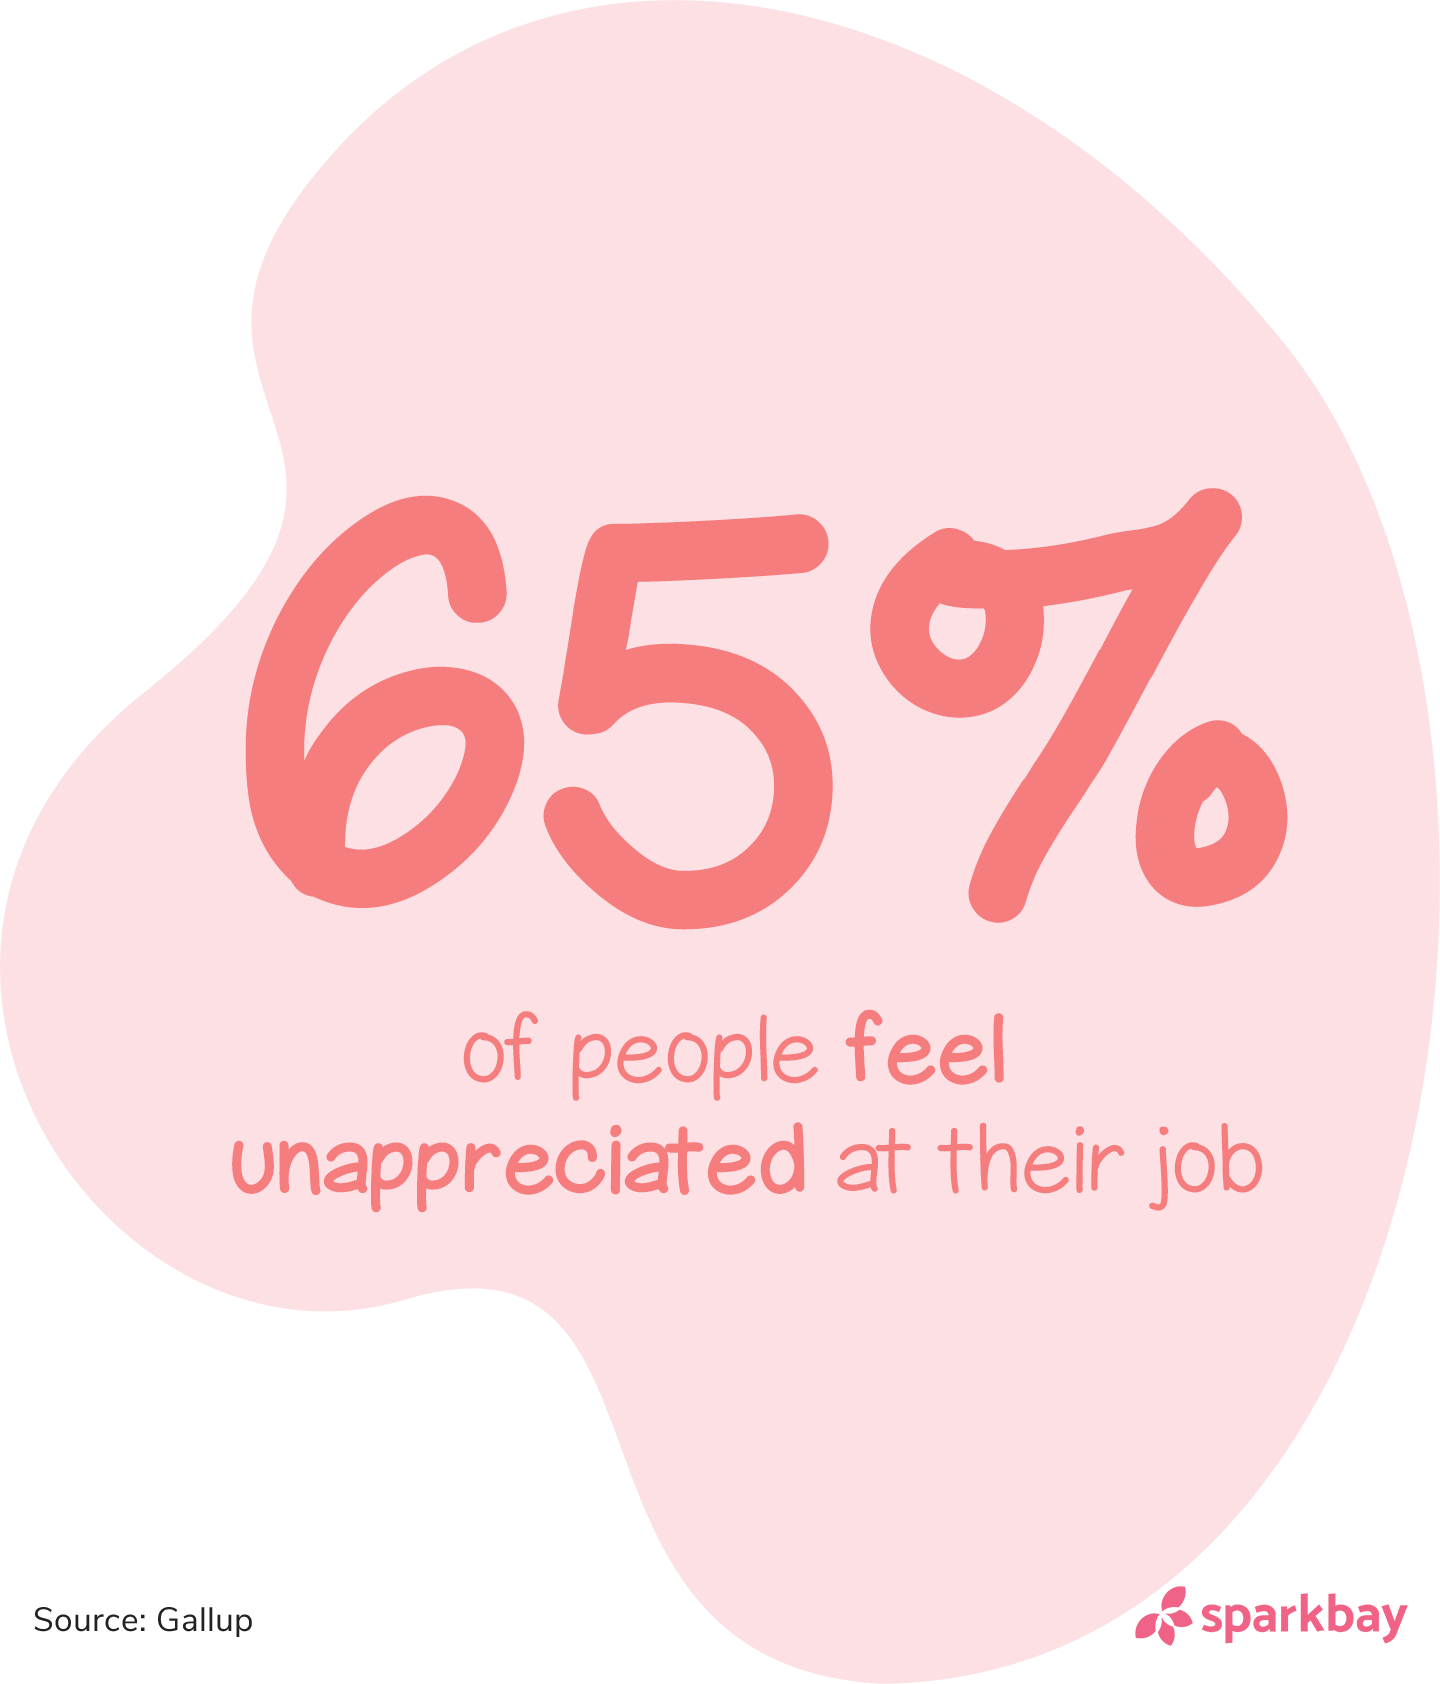 Employee recognition statistics: 65% of people feel unappreciated at their job.'